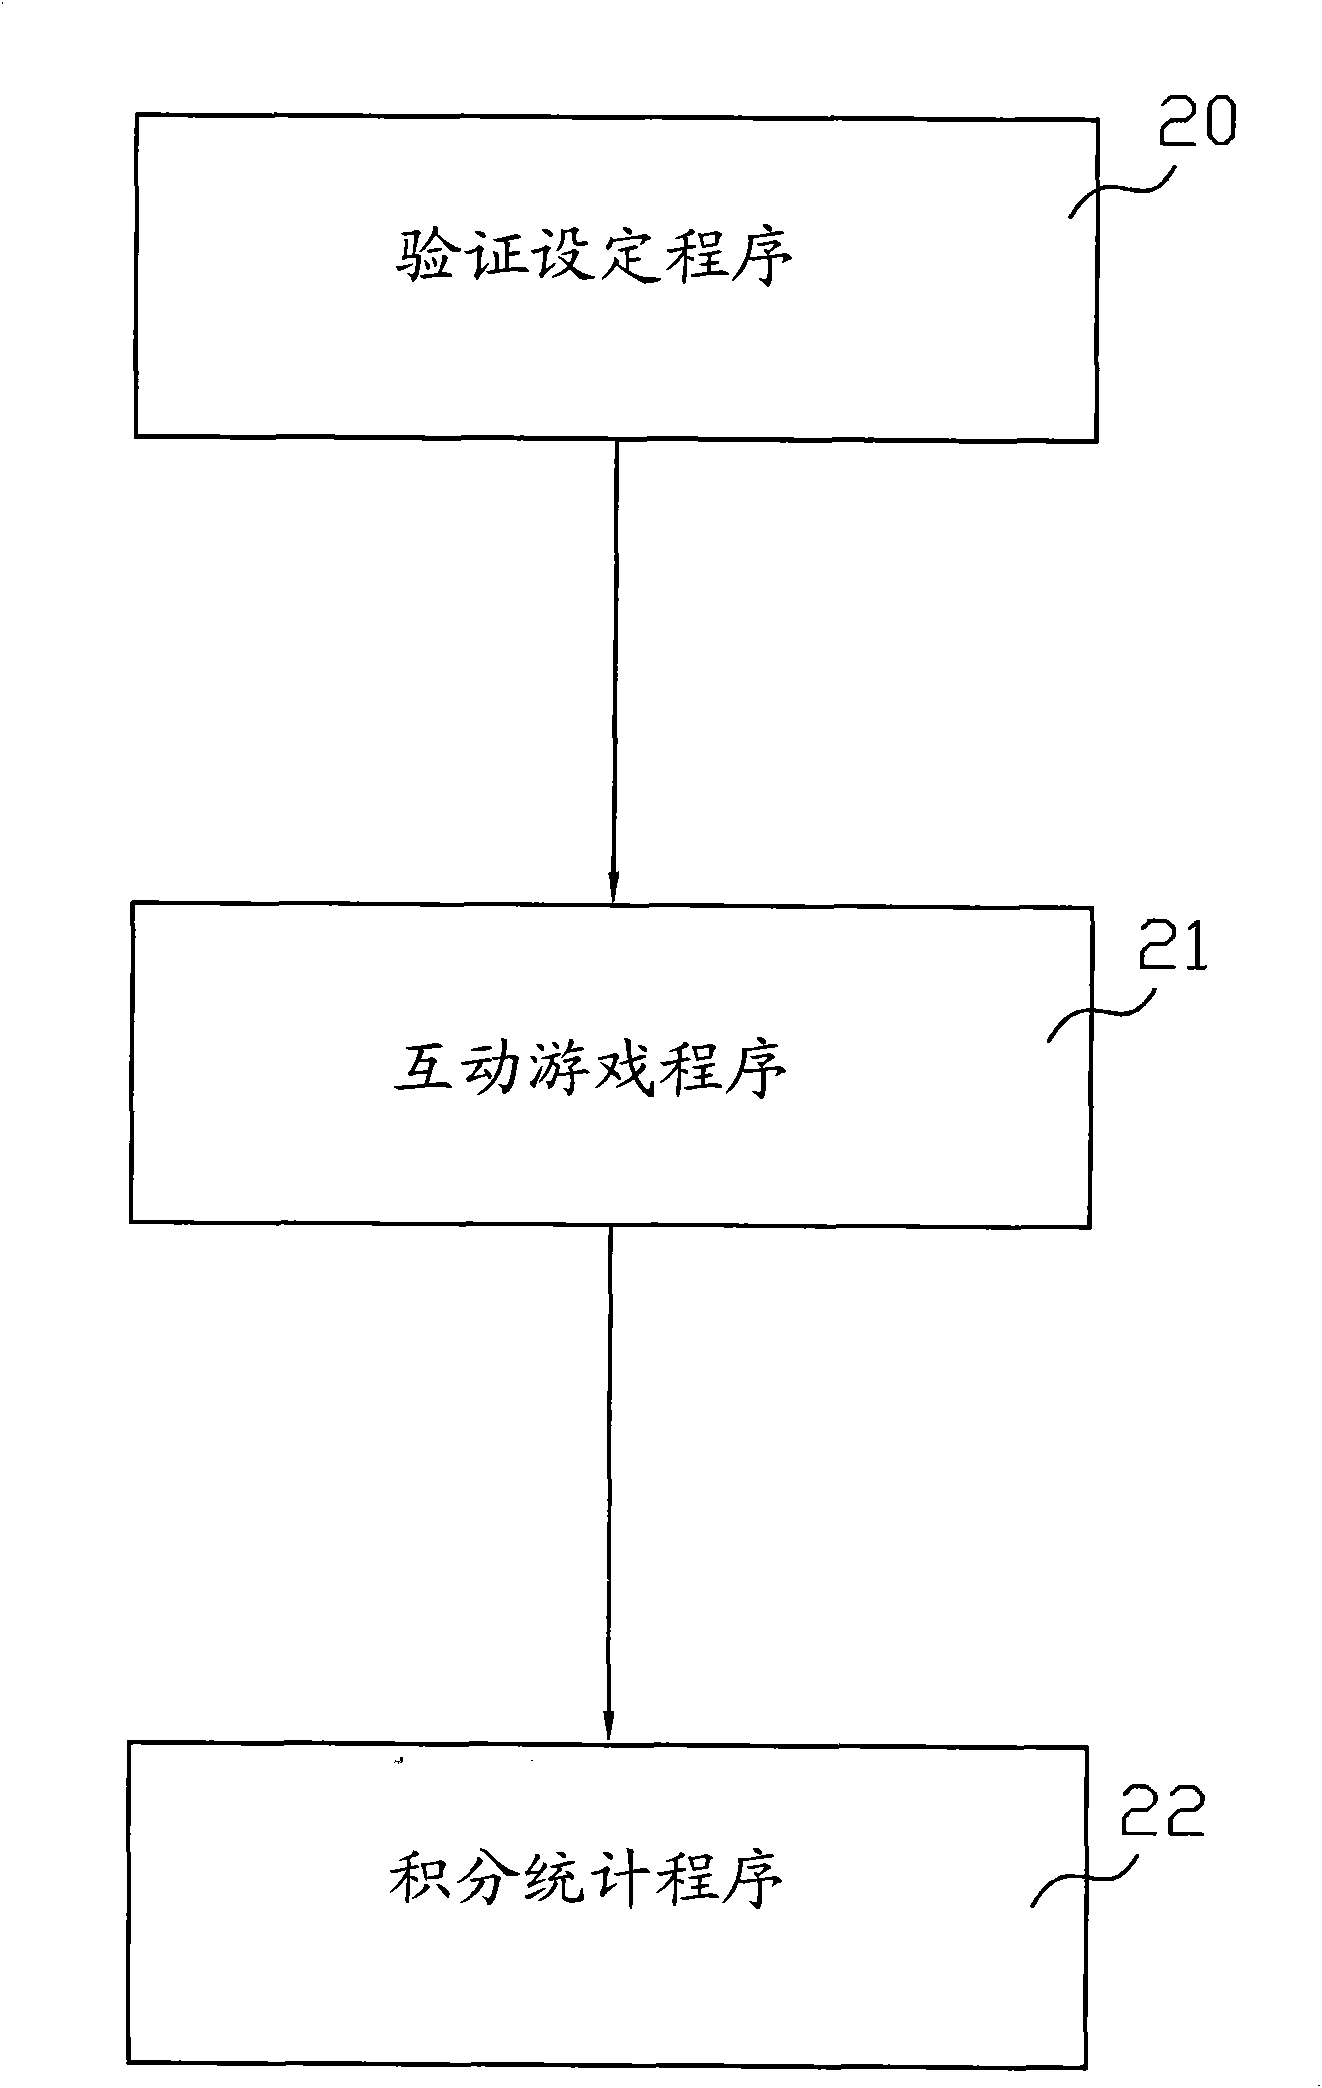 Interactive learning system and method thereof